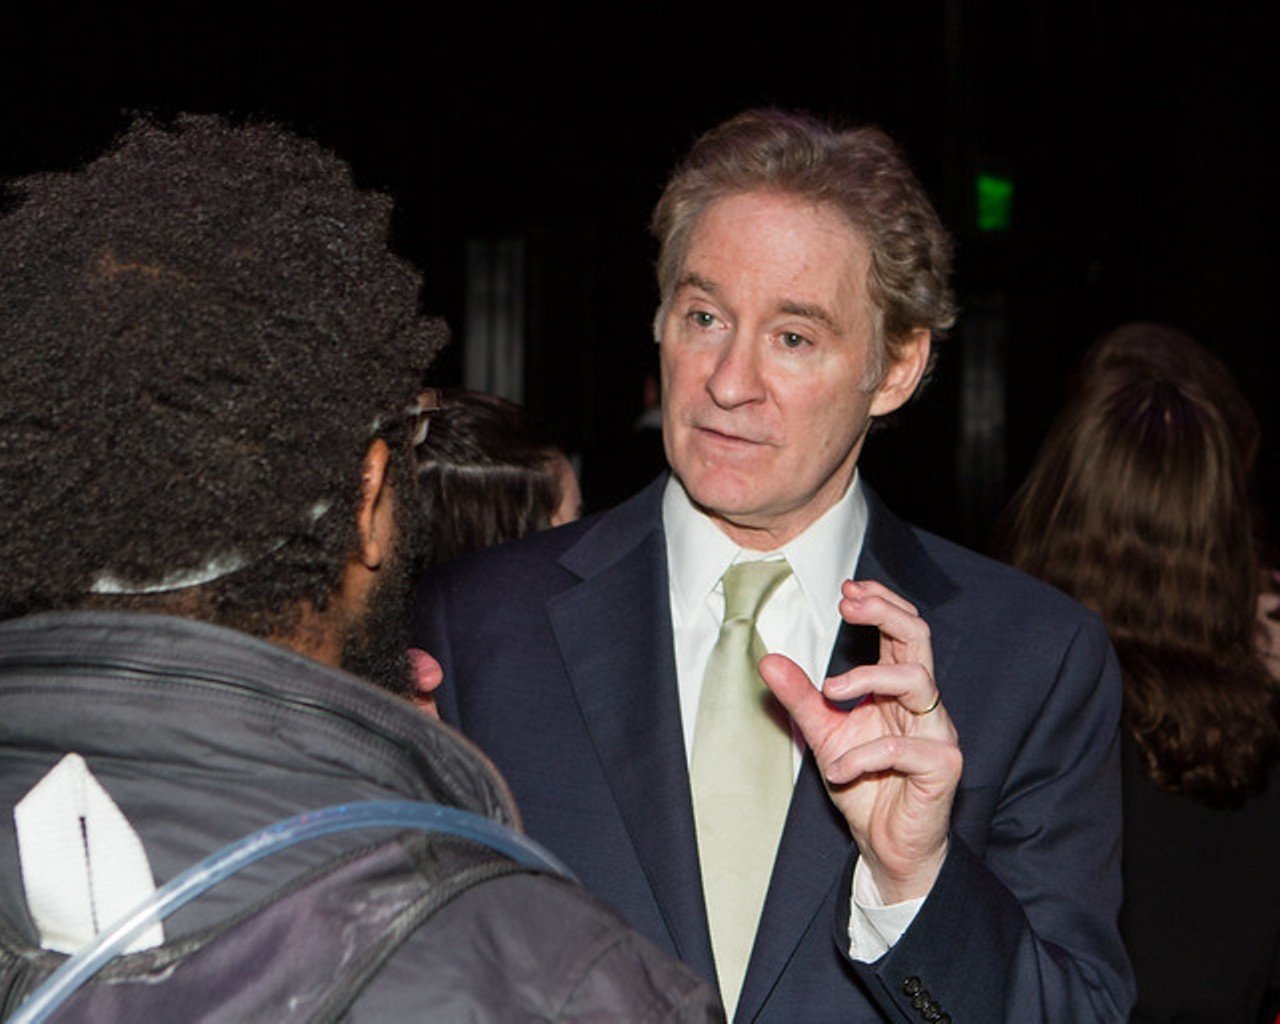 Saint Louis Priory School 
Kevin Kline  
Actor 
Best known for A Fish Called Wanda, Kevin Kline has won an Academy Award and three Tony Awards, which makes him one of the most acclaimed actors of his era. He’s also a proud graduate of Priory, class of 1965.